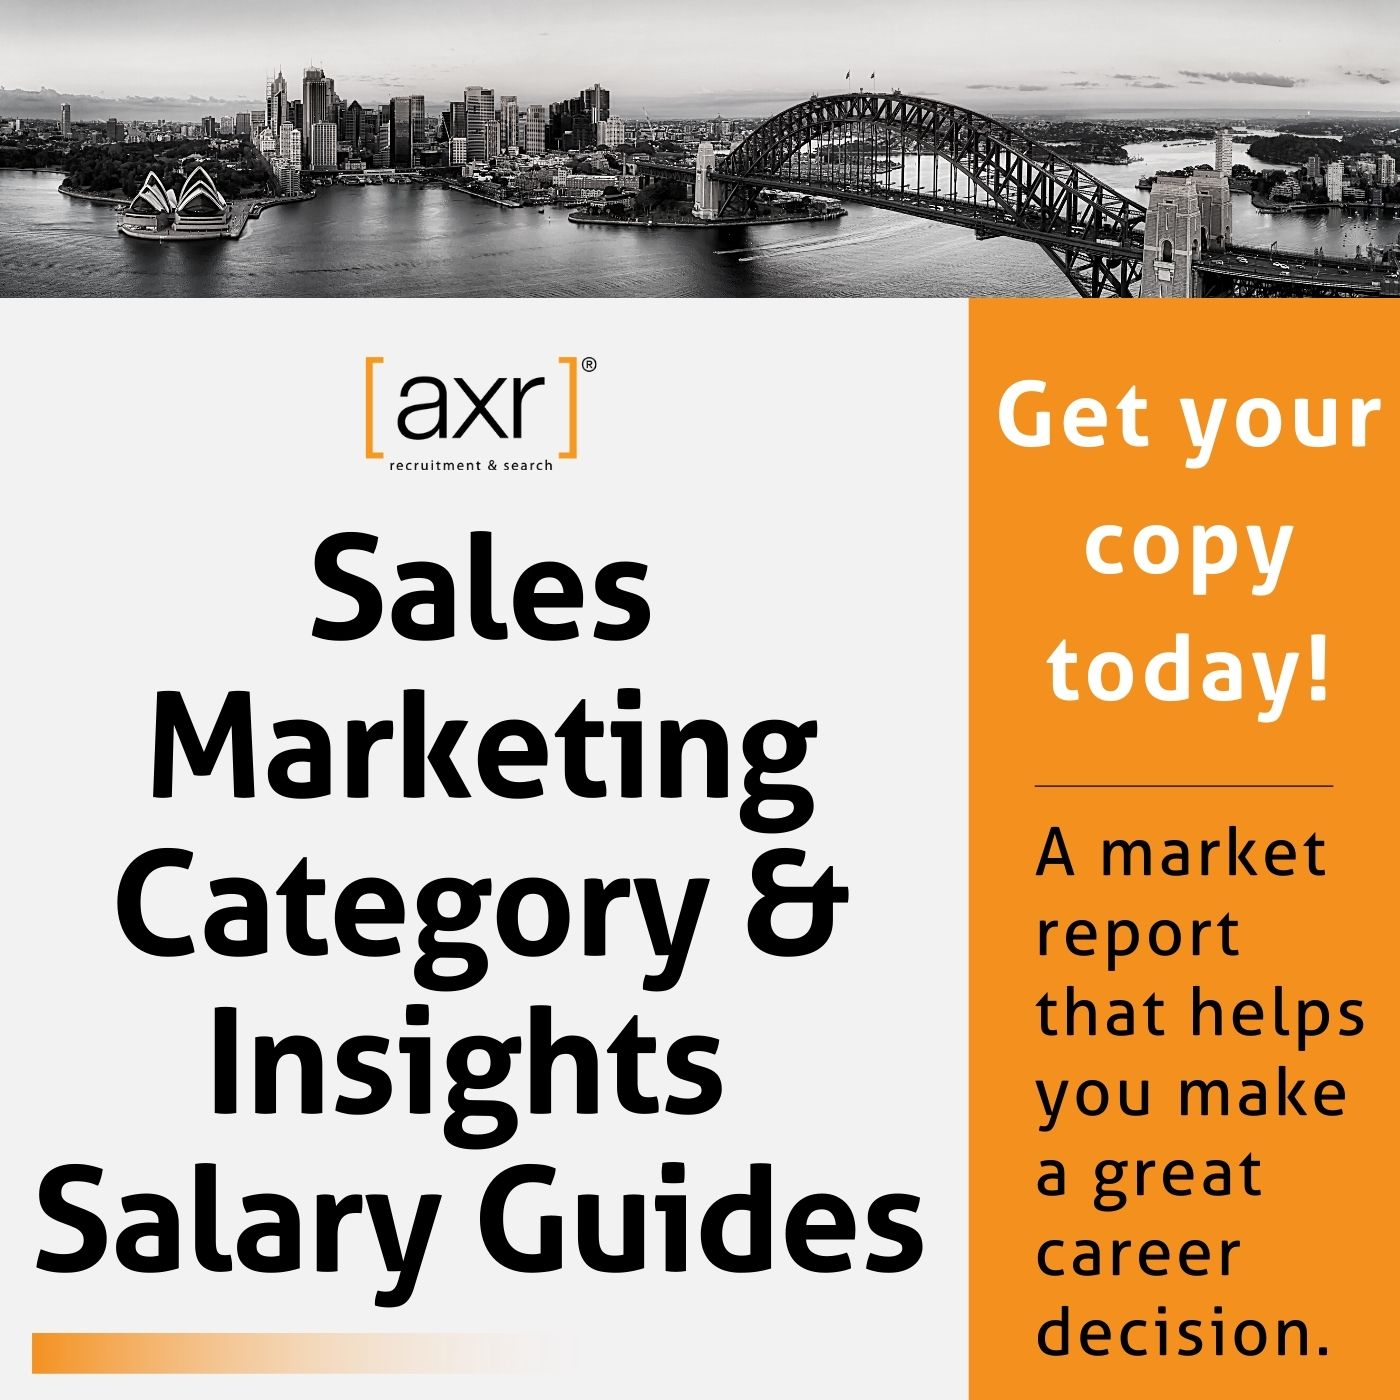 Sales, Marketing & Category Careers - salary guides